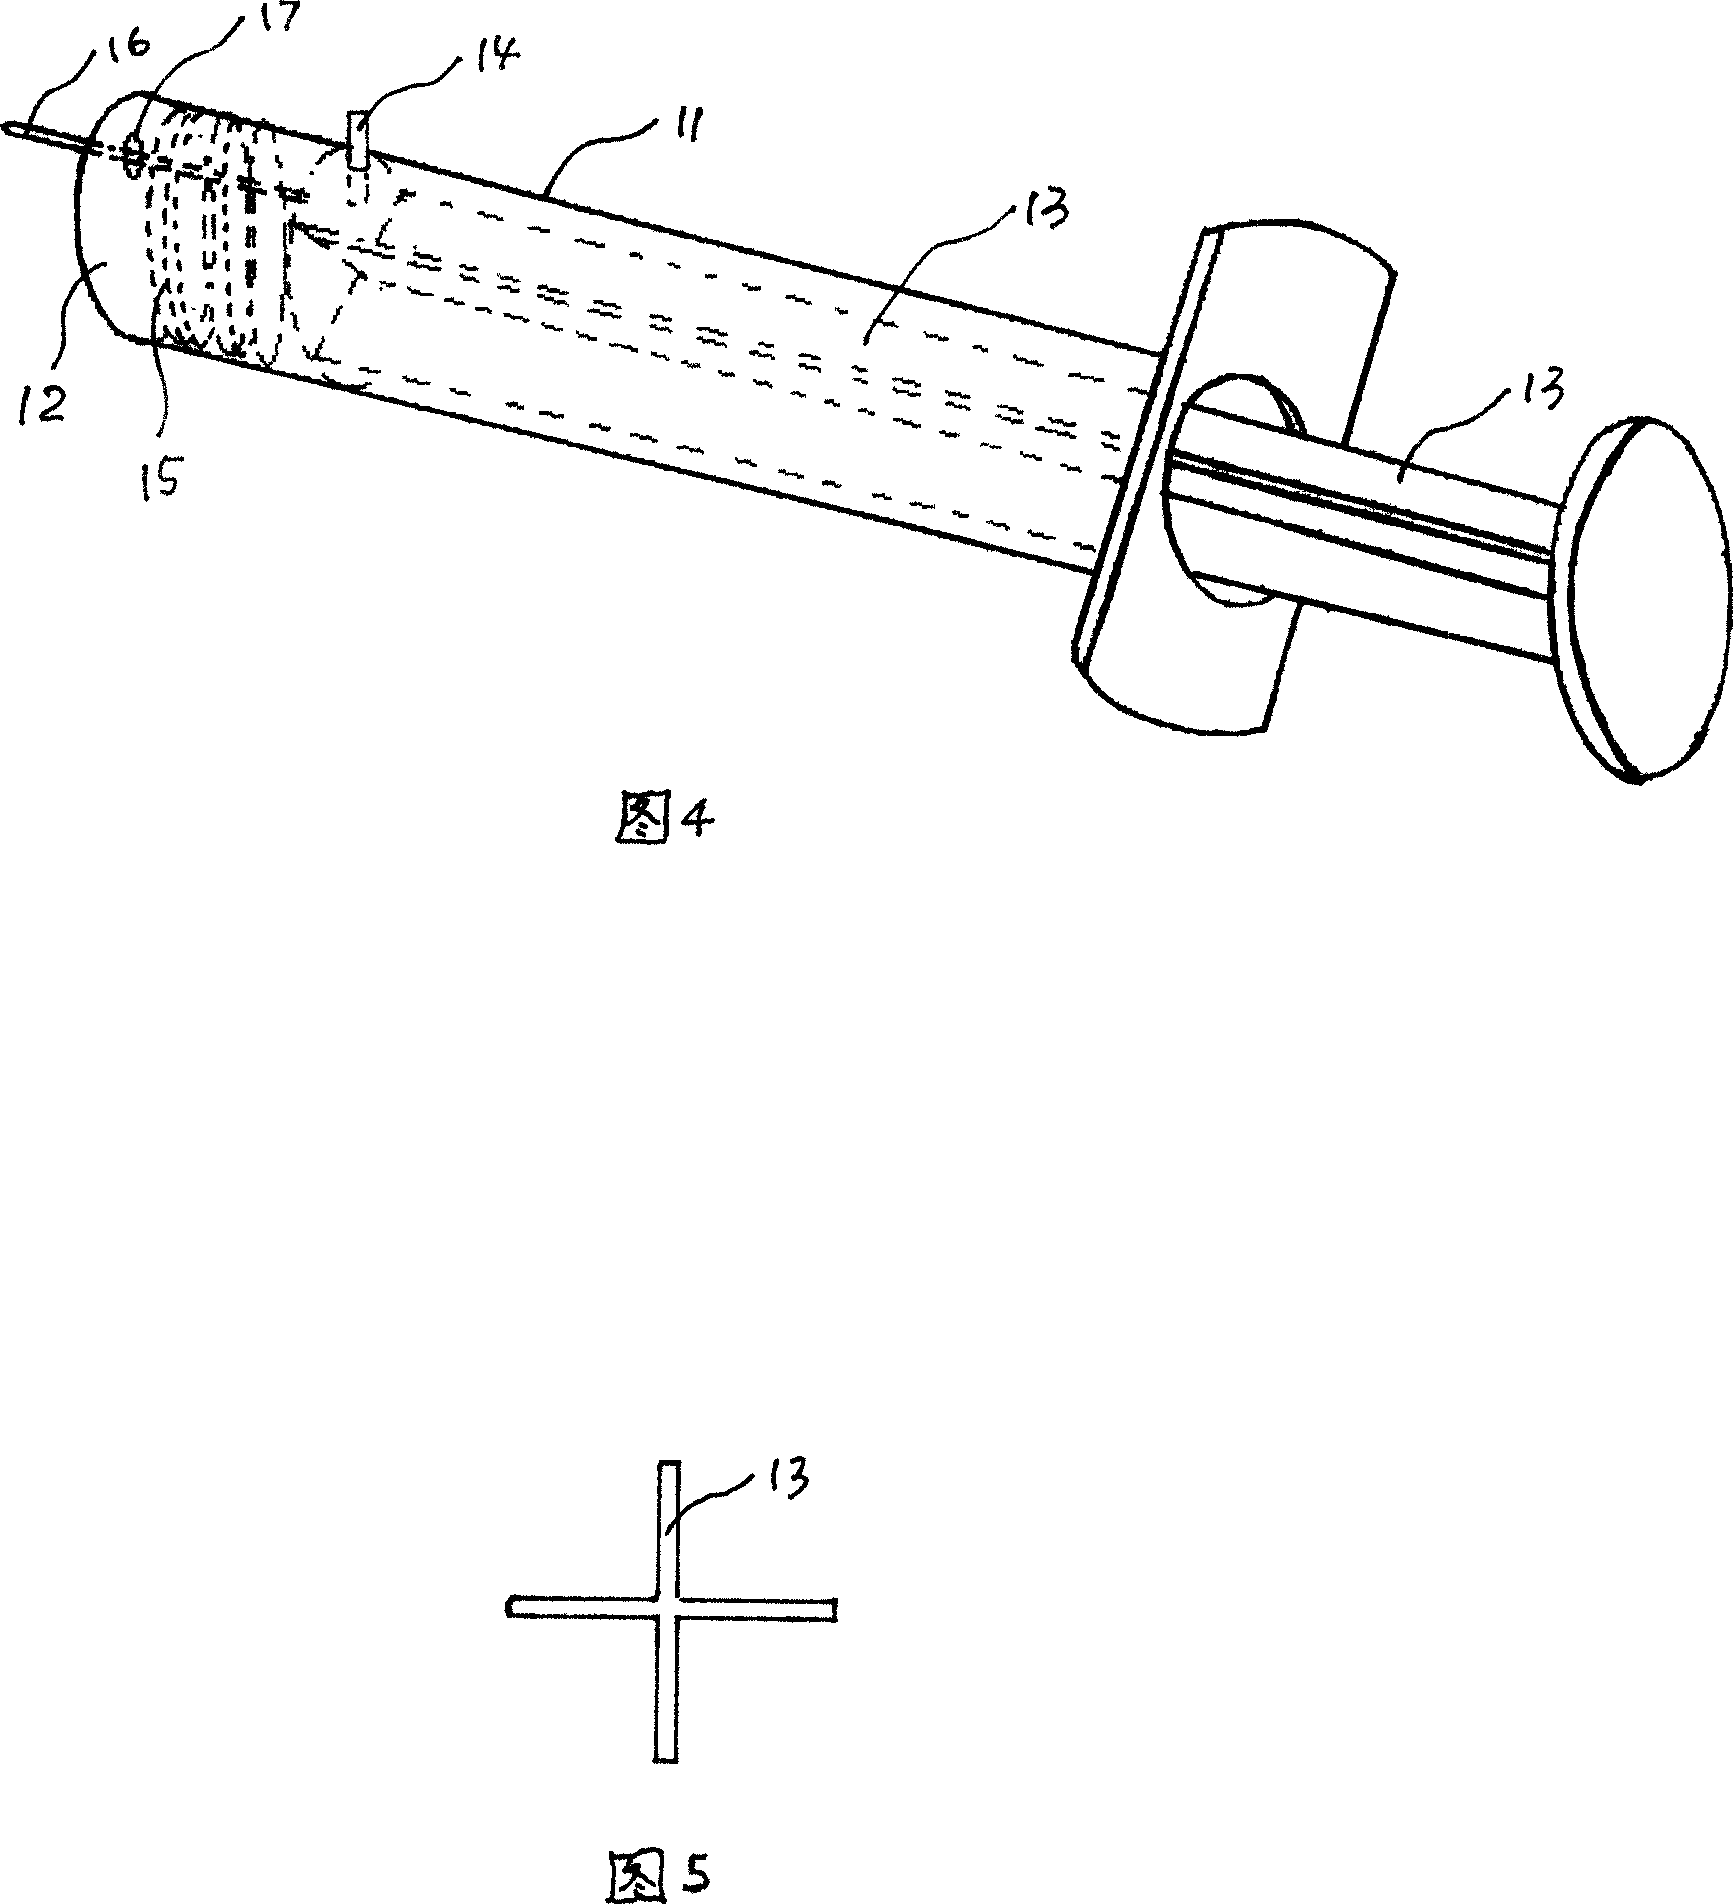 Pollination device for orchid